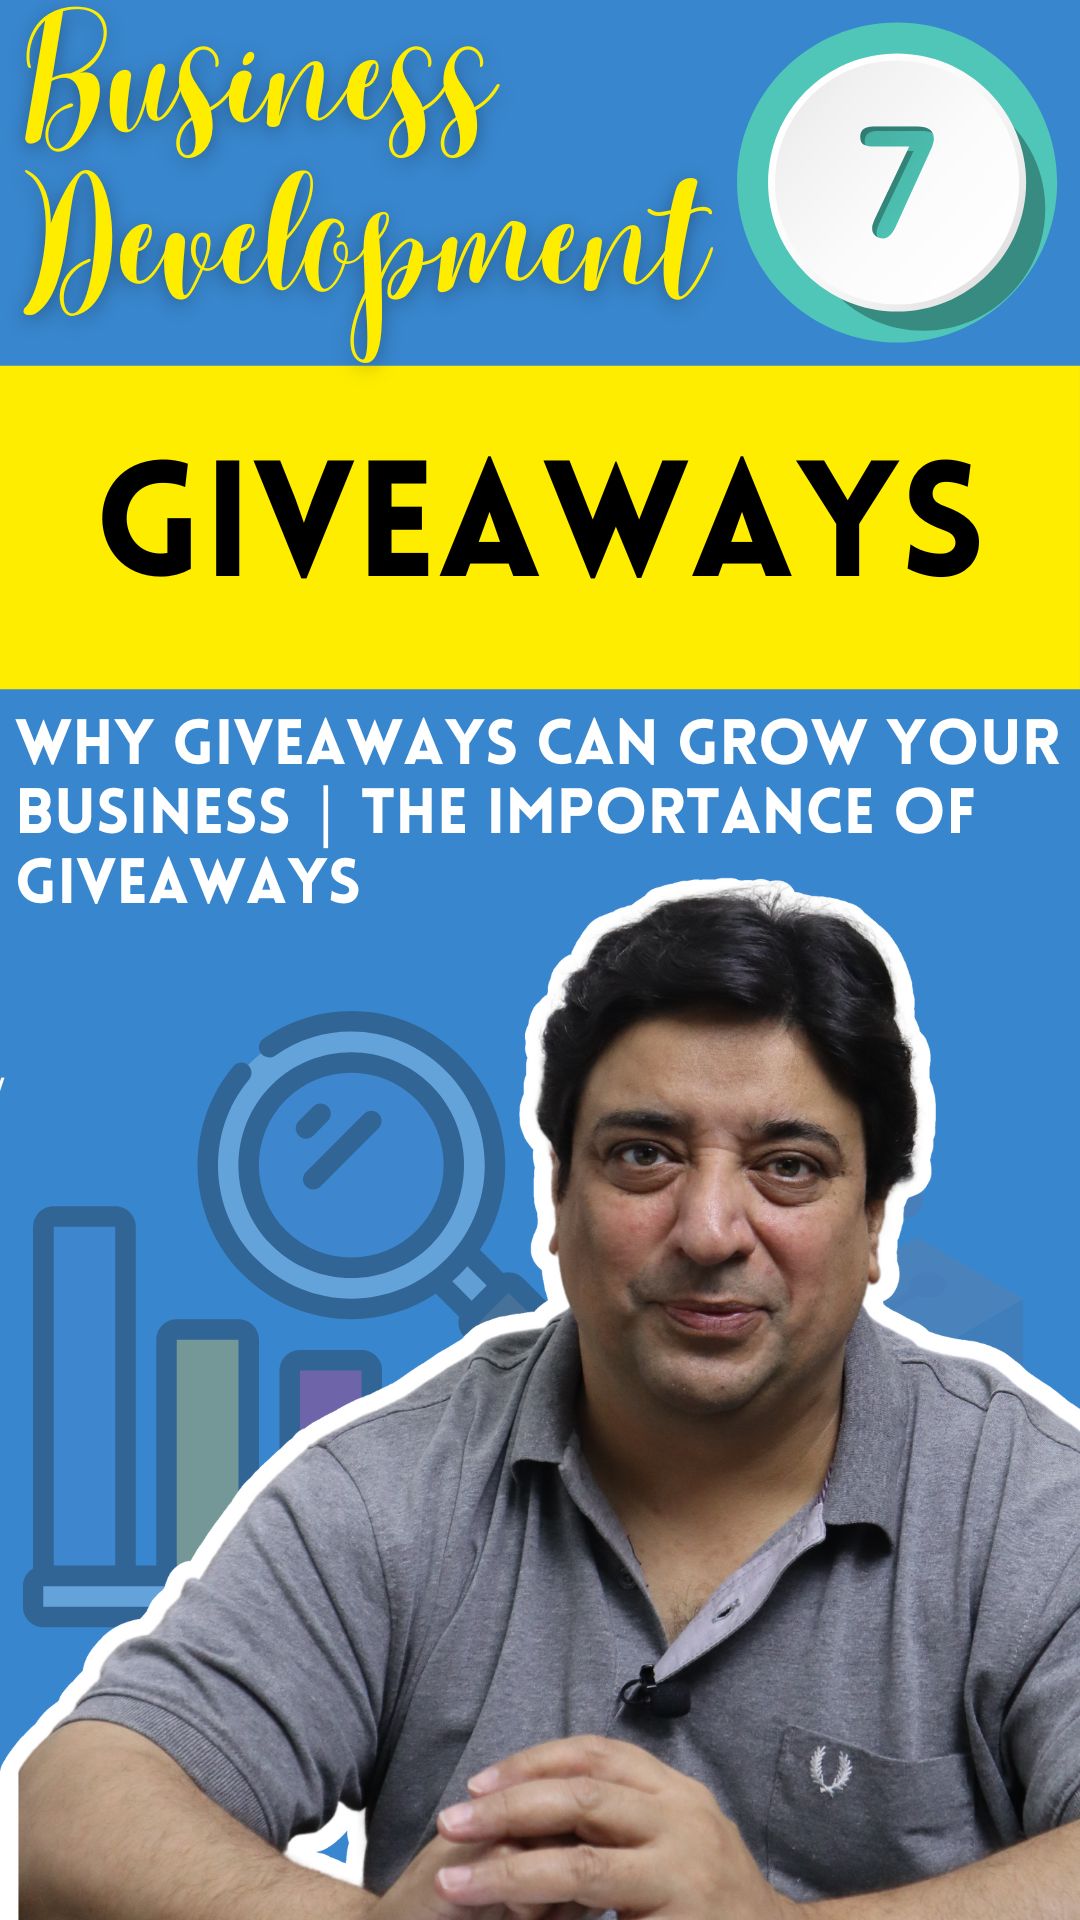 Why giveaways can grow your business The importance of giveaways